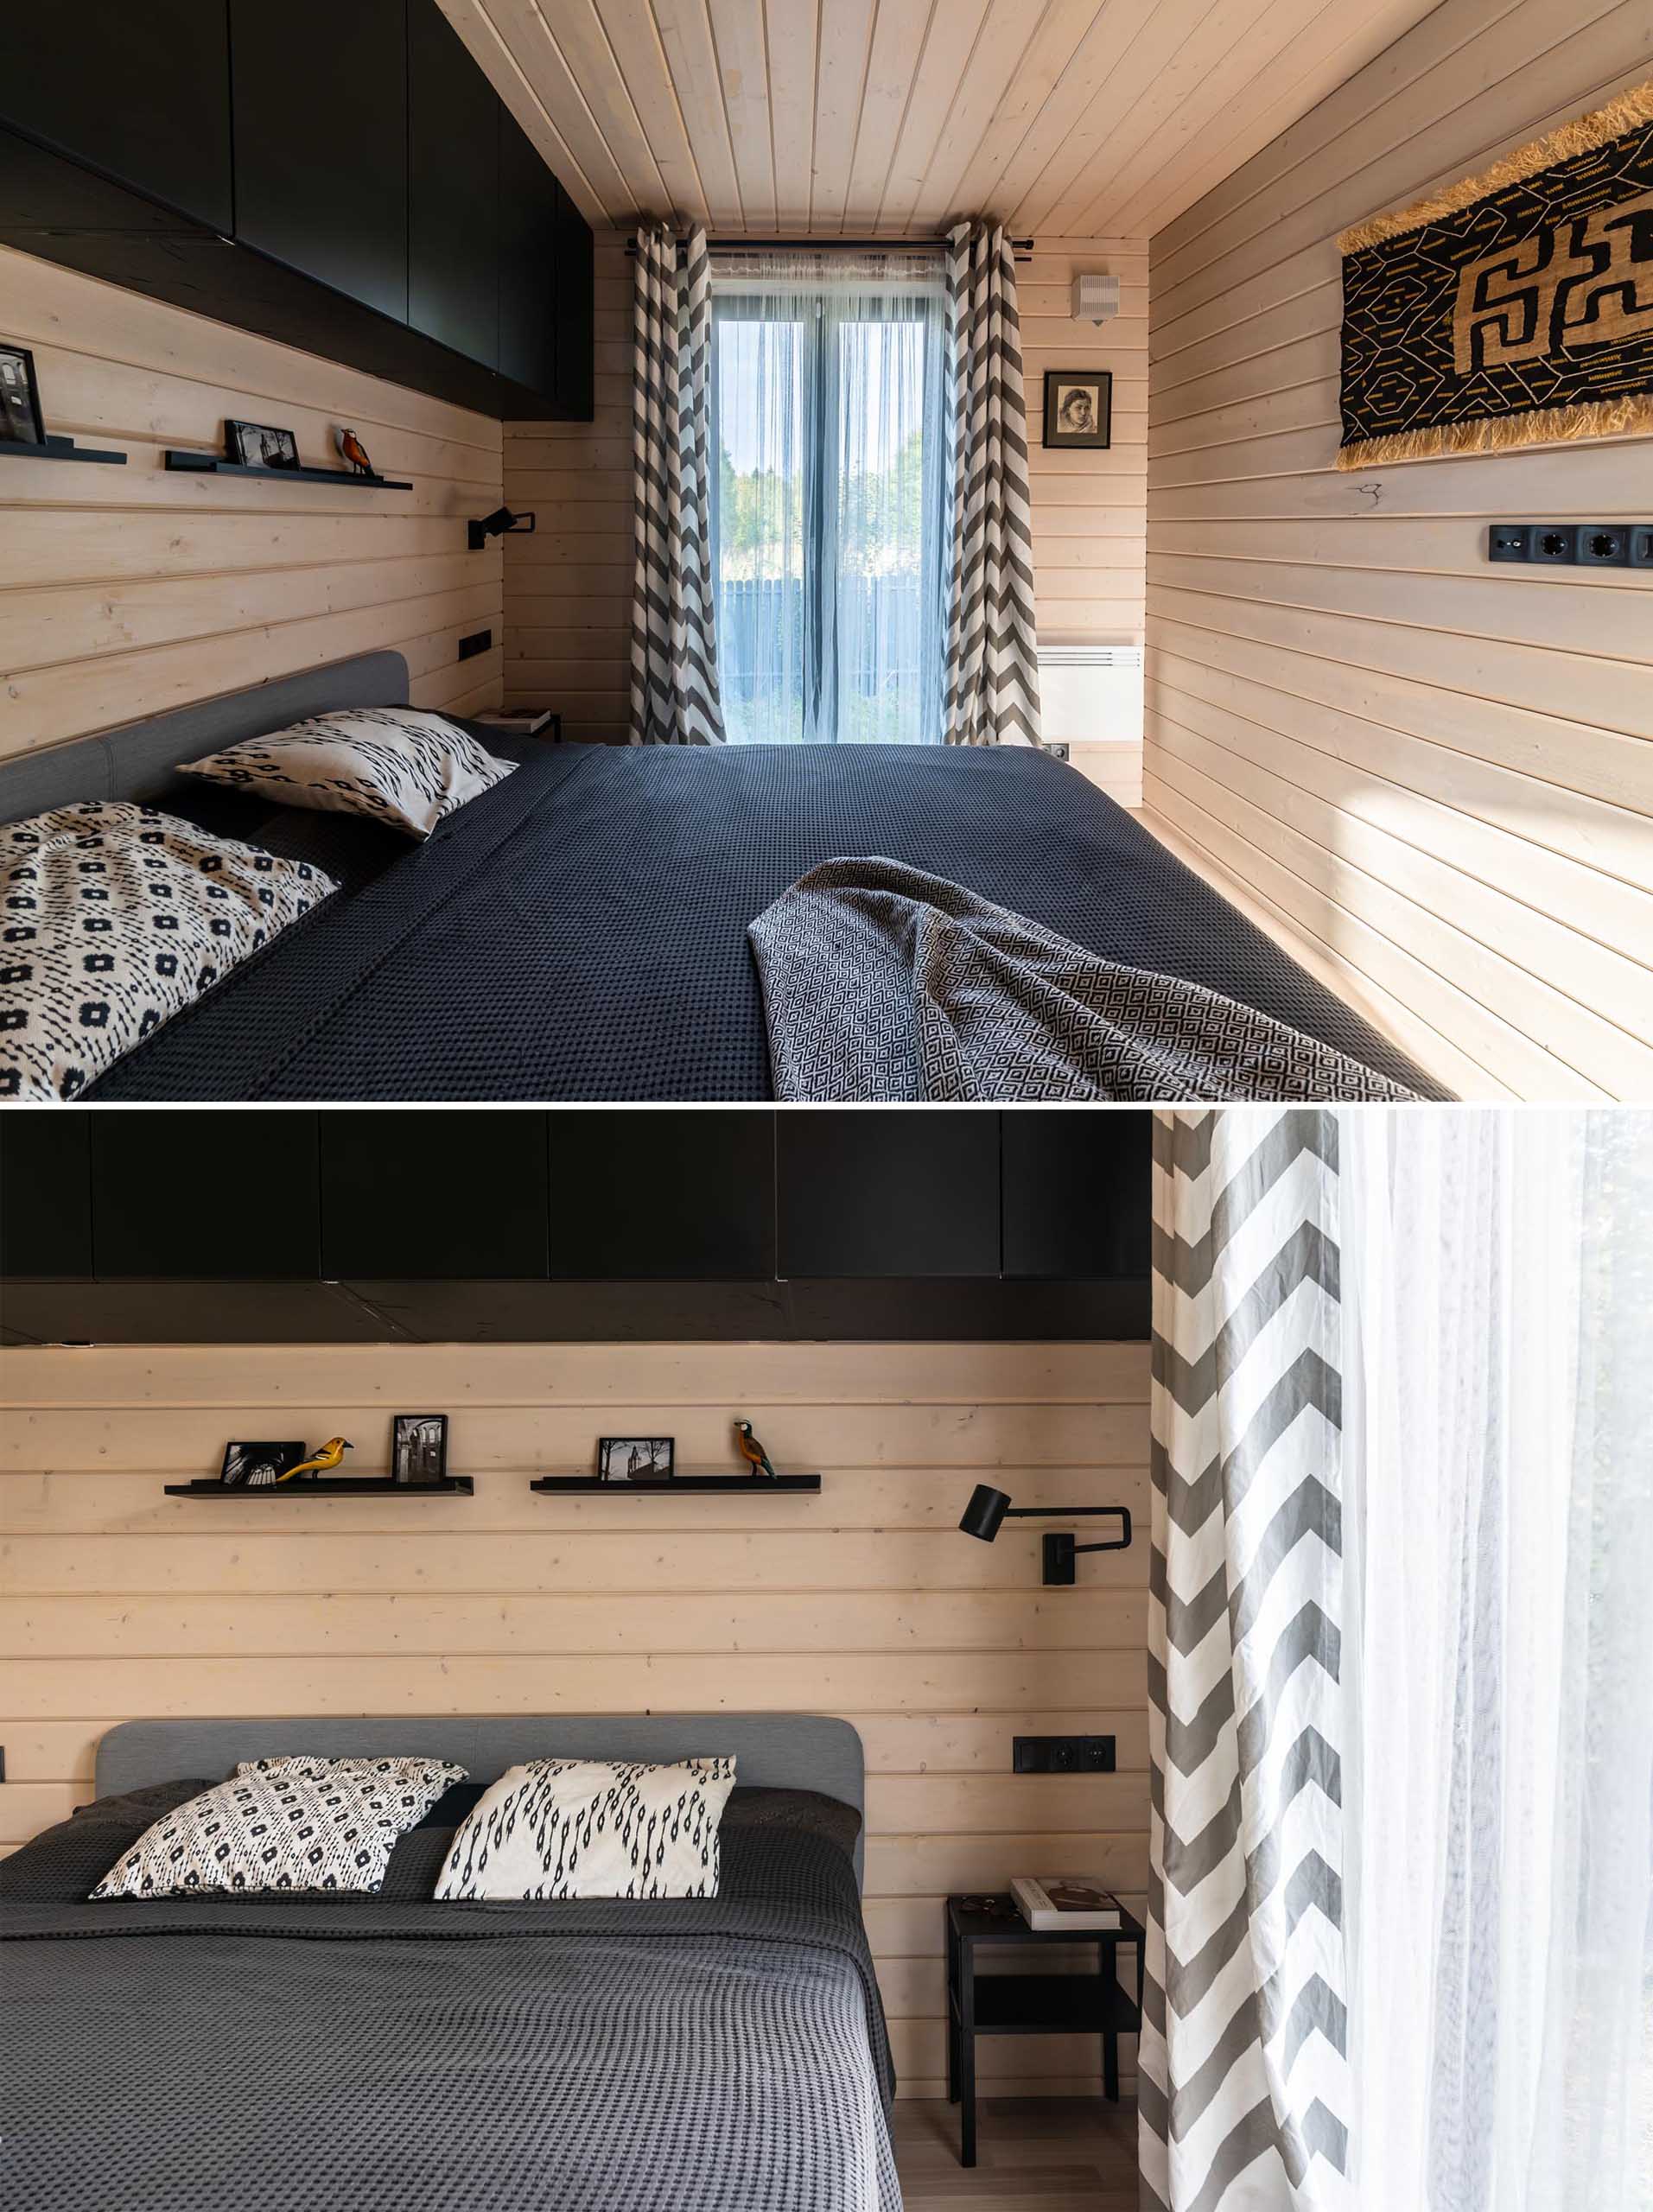 A modern barn-inspired bedroom with tongue and groove wood siding and black accents.